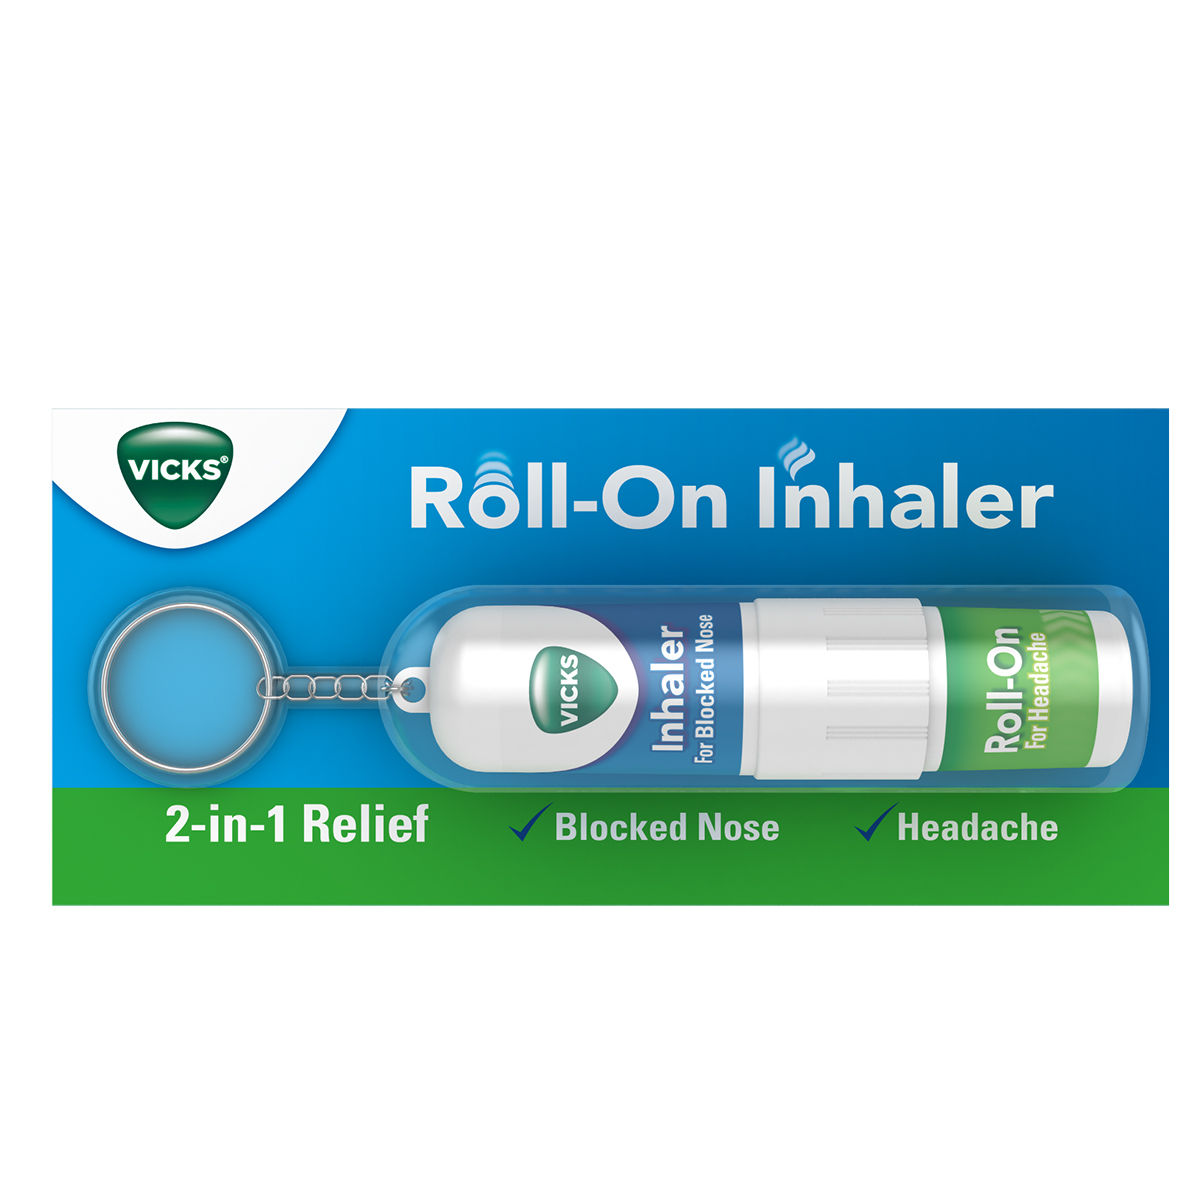 VICKS roll on inhaler 2 in 1 relief for headache and blocked nose Balm -  Buy Baby Care Products in India